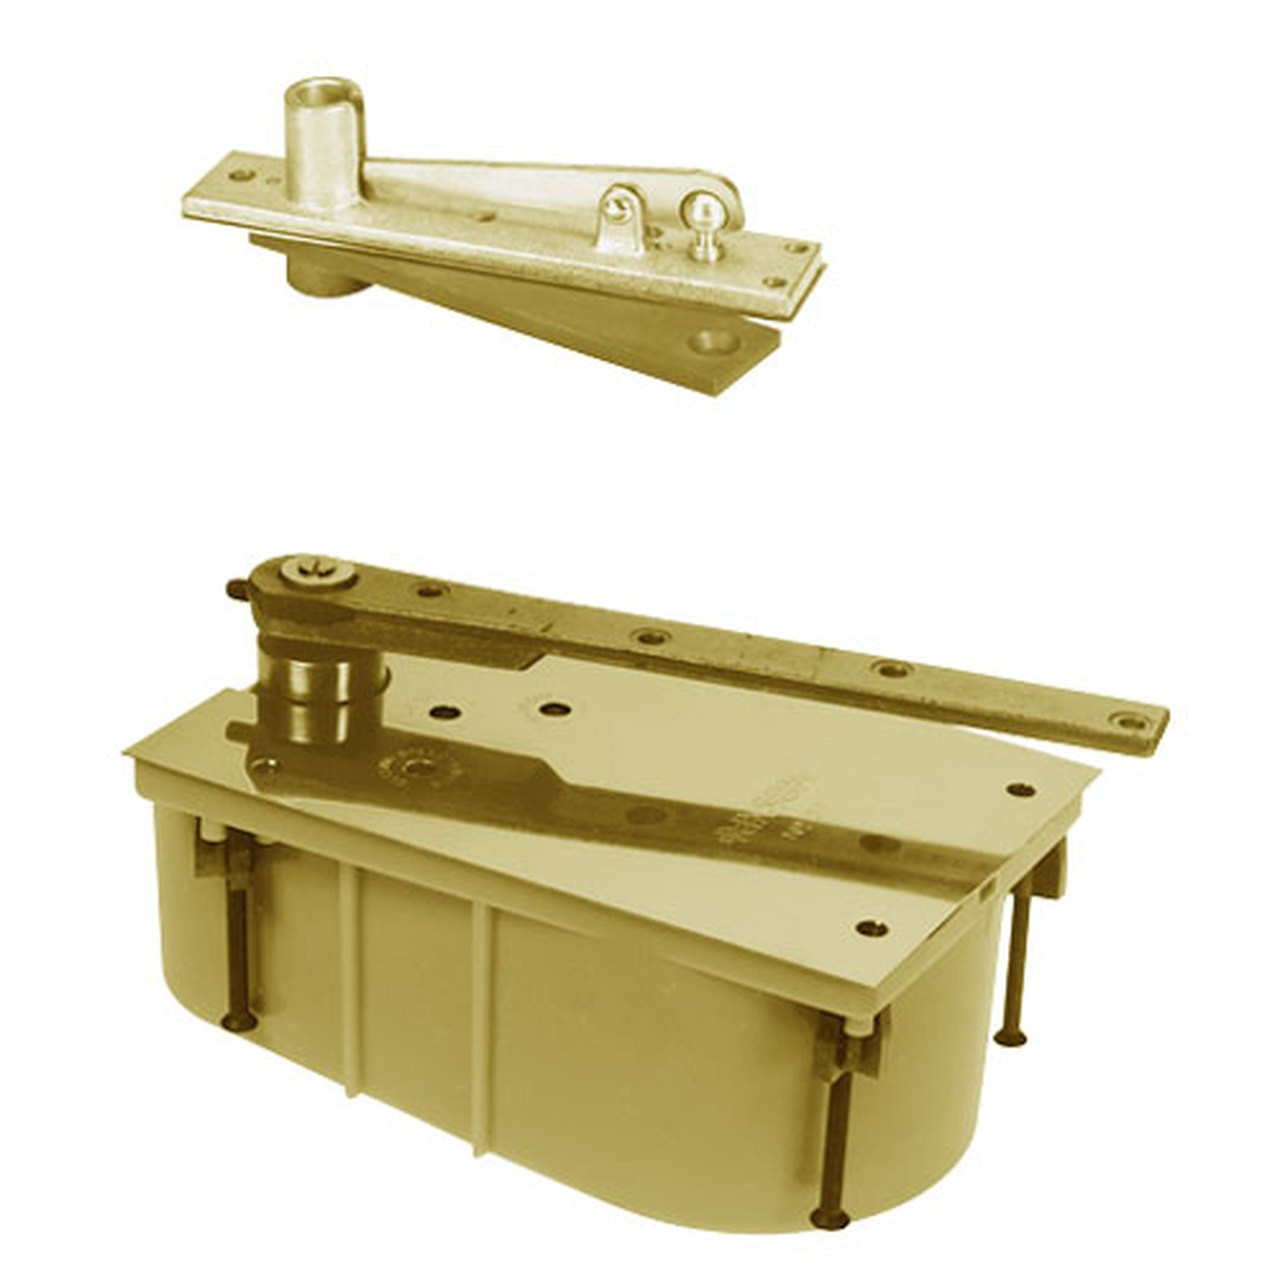 28-105S-554-LCC-RH-606 Rixson 28 Series Heavy Duty Single Acting Center Hung Floor Closer with Concealed Arm in Satin Brass Finish